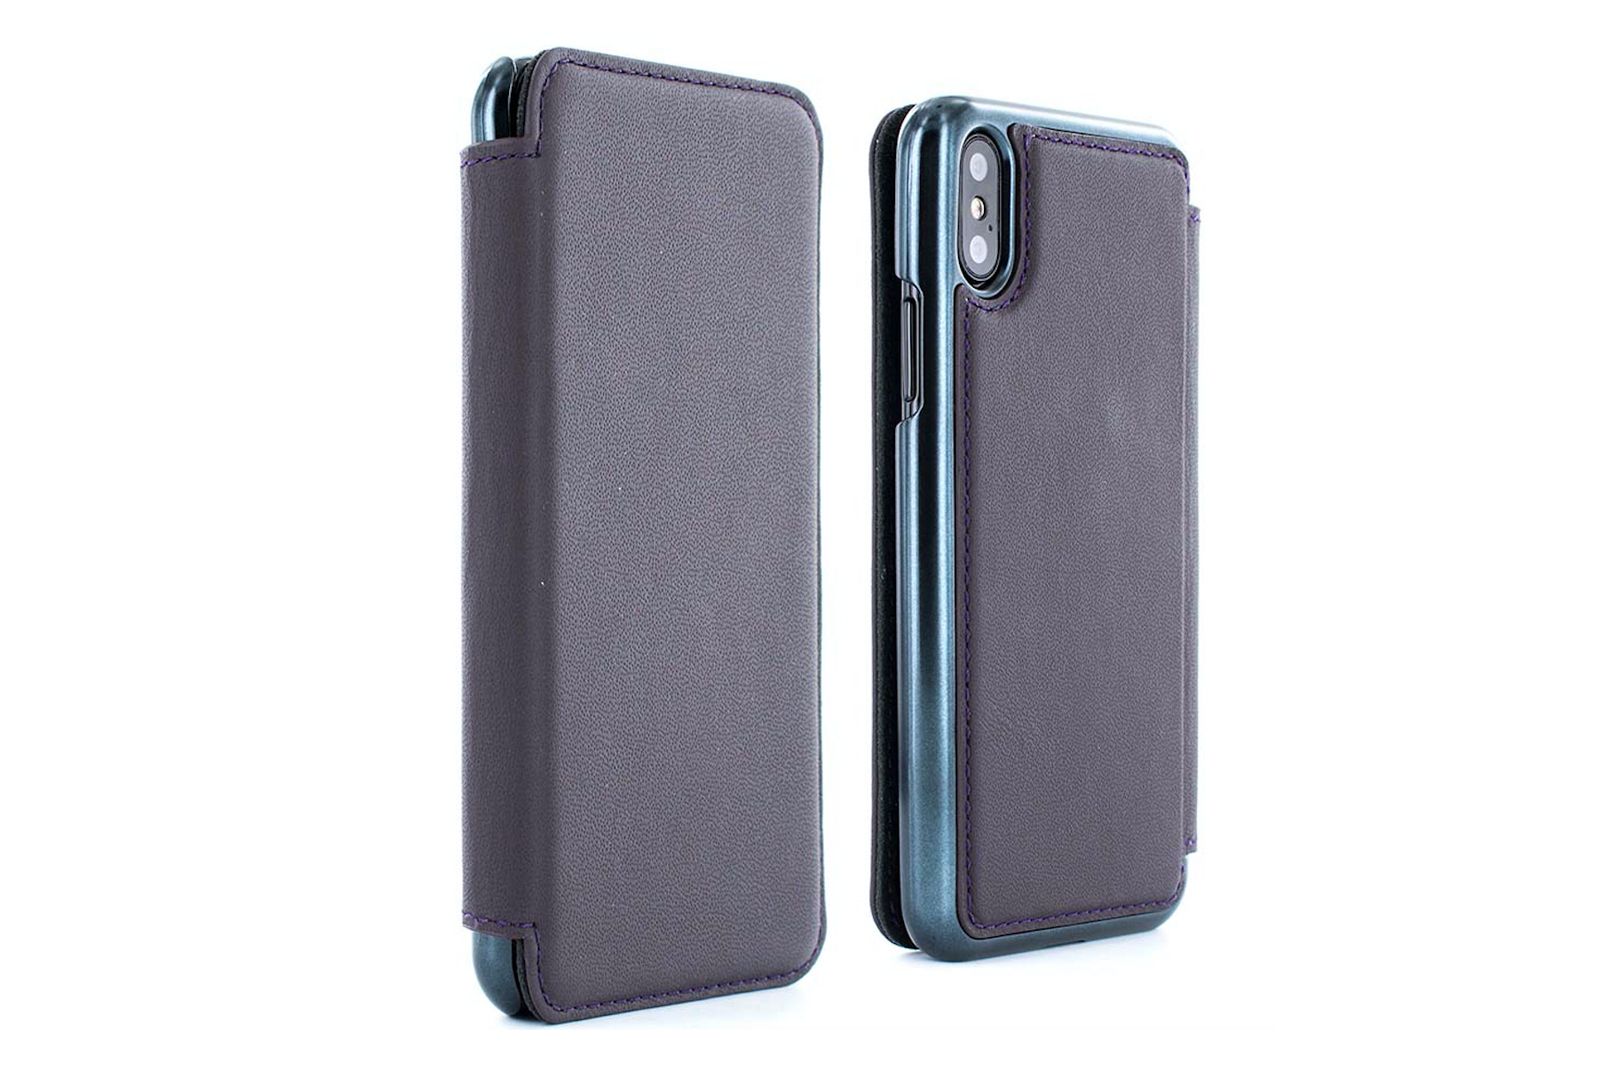 Best Iphone Xs And Xs Max Cases Protect Your New Apple Smartphone image 5